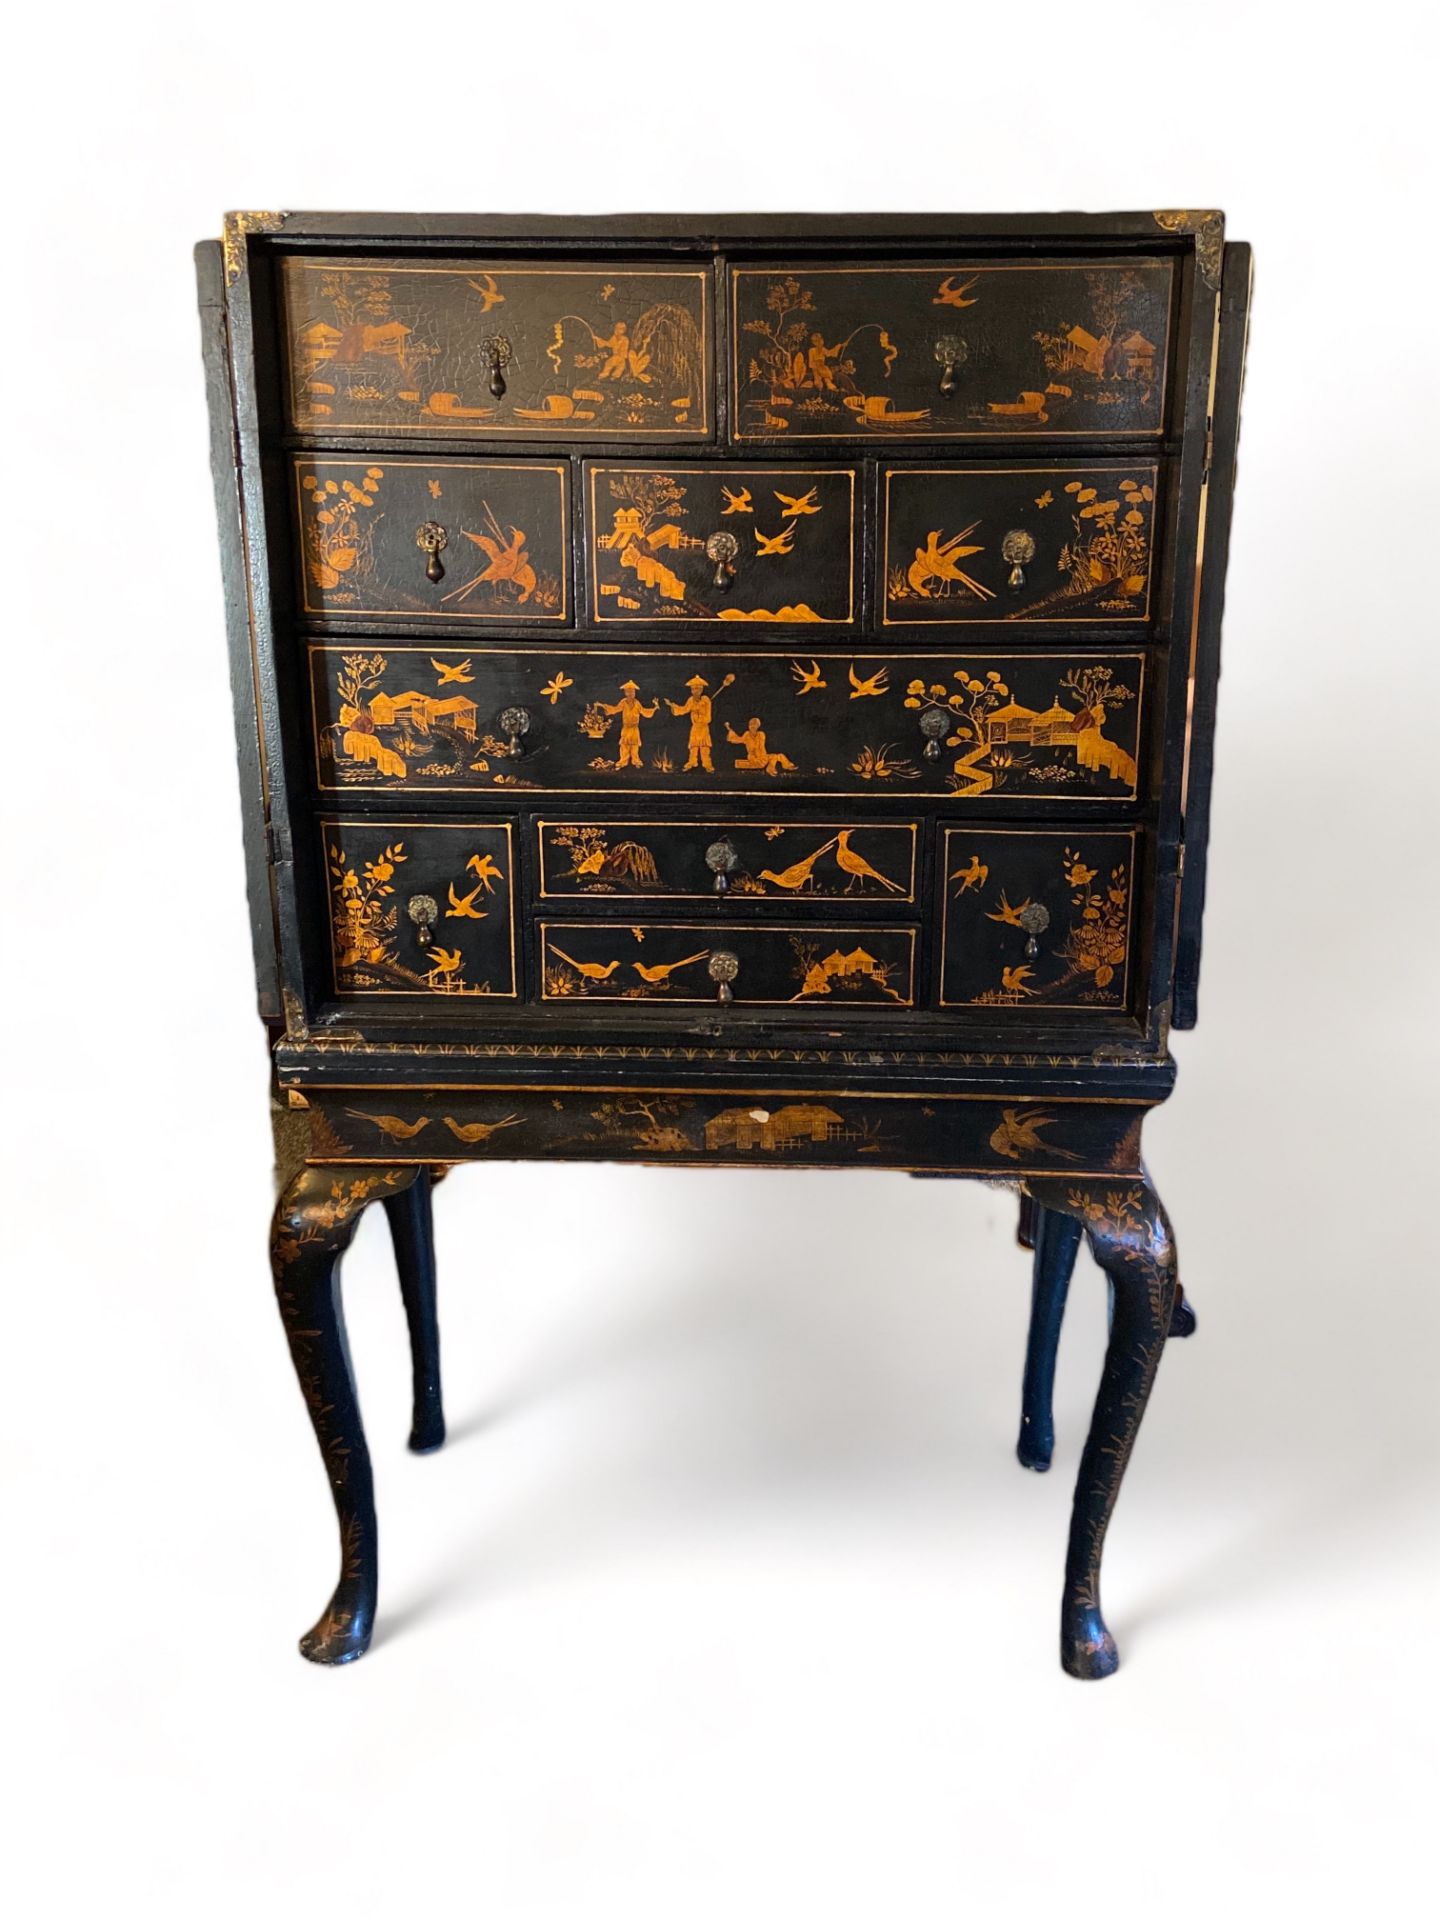 An early 18th century Chinese export black lacquer cabinet on a European stand - Image 20 of 36